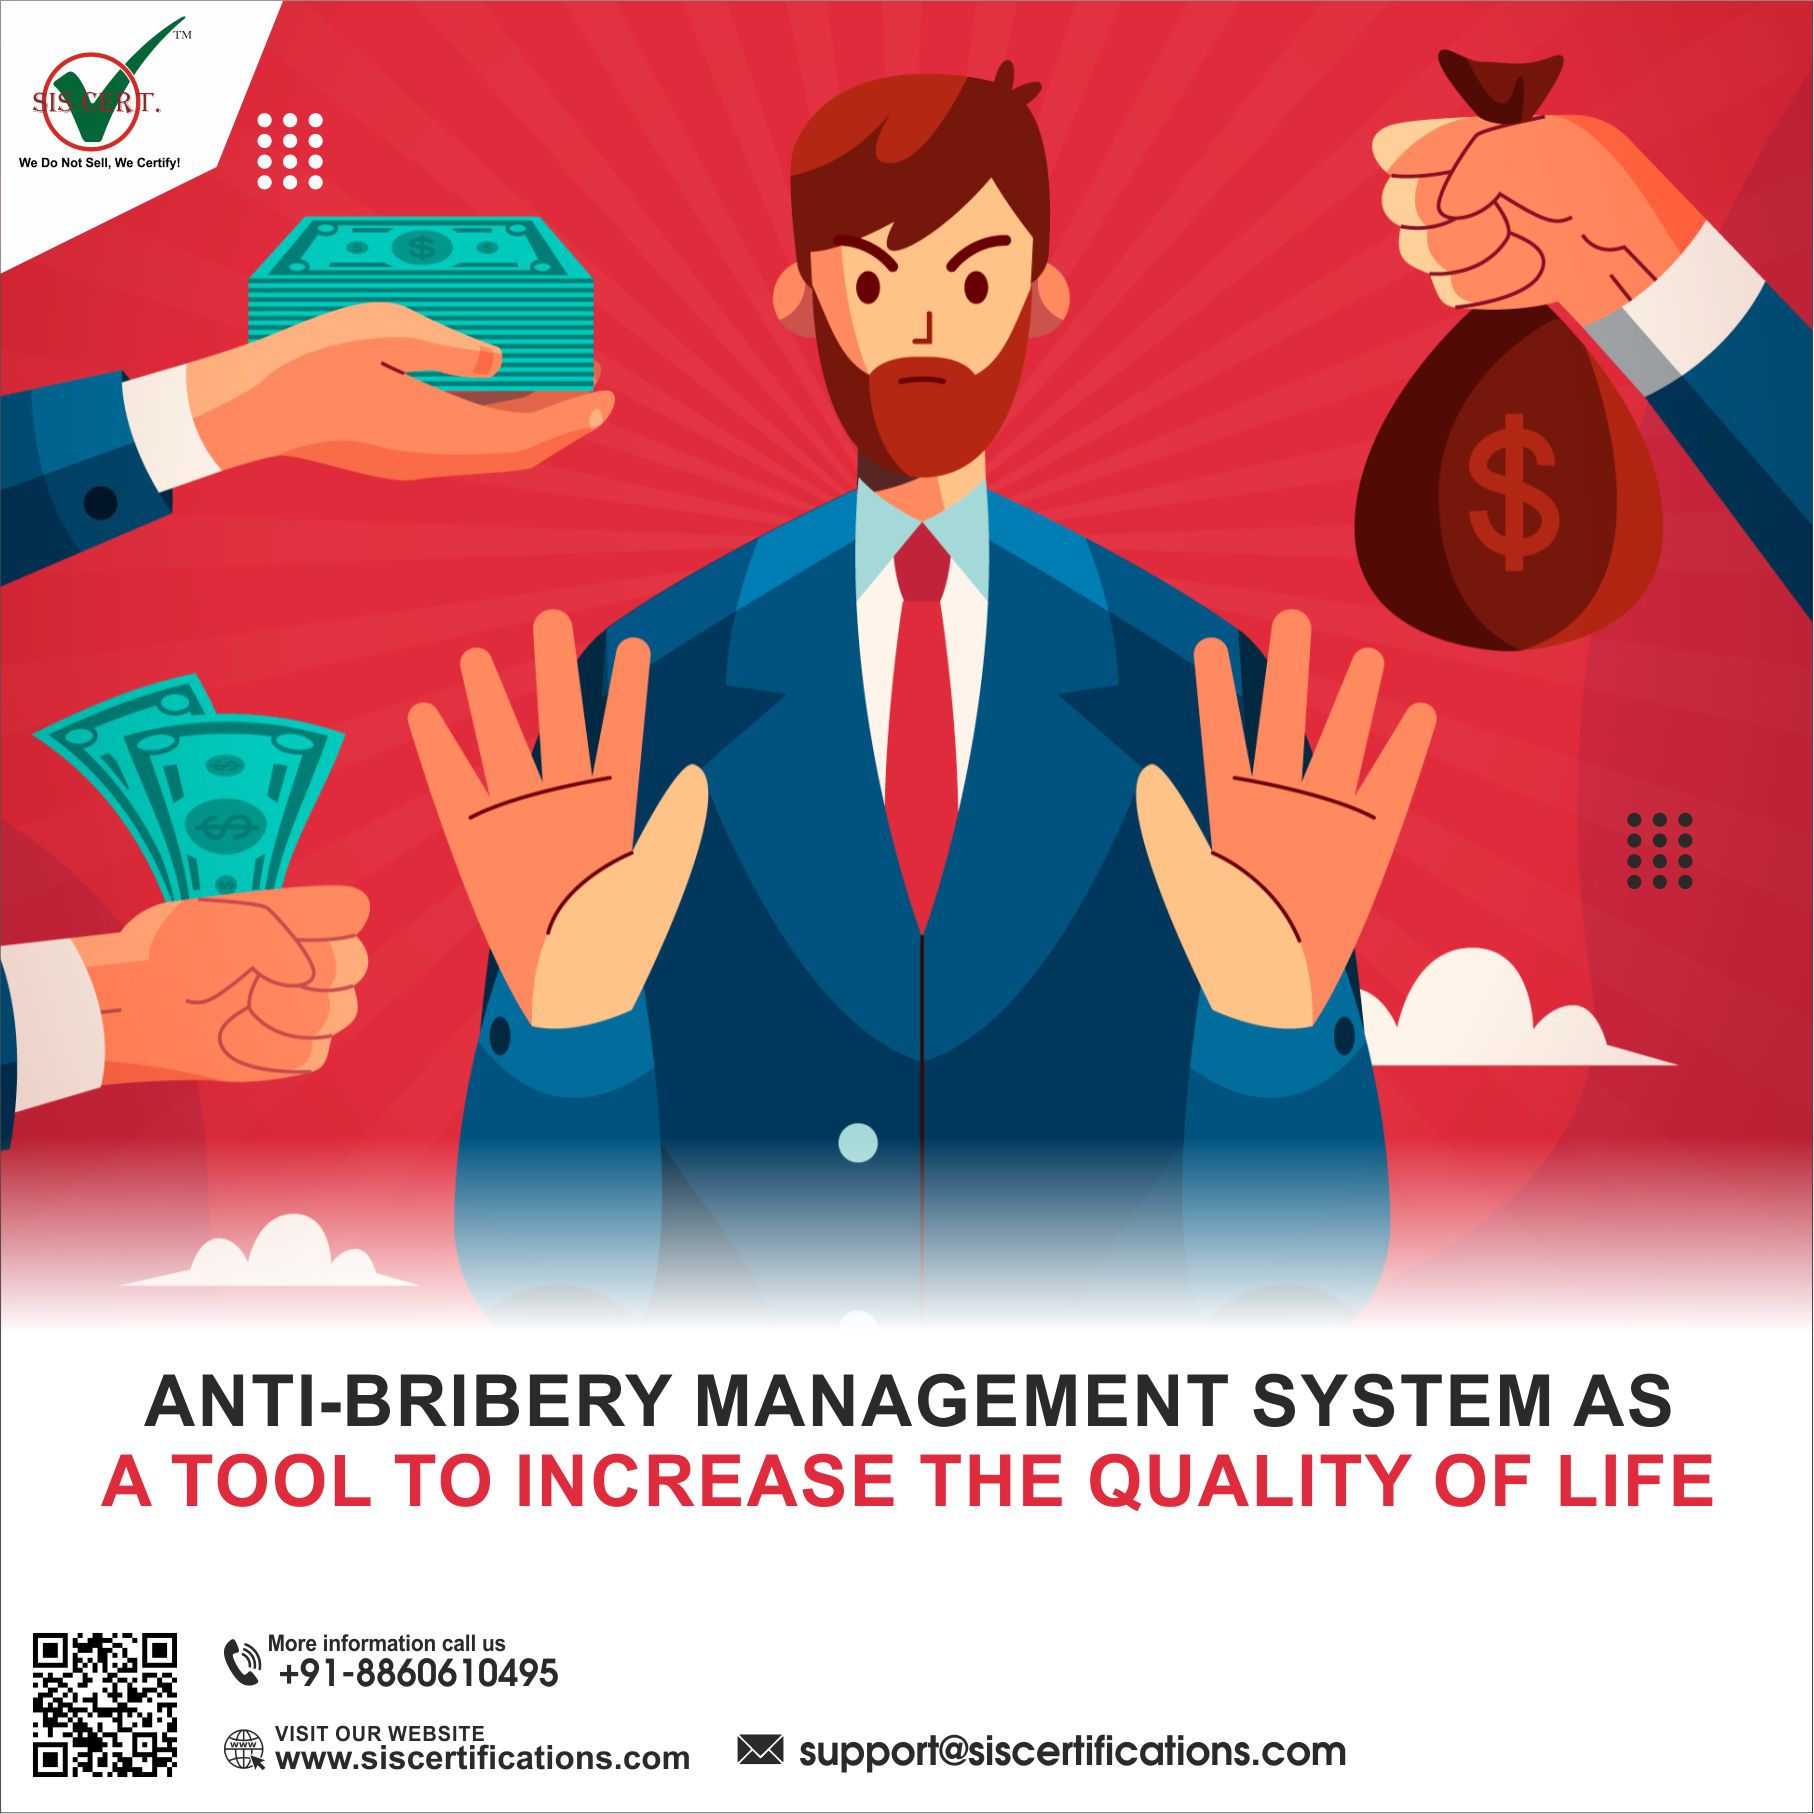 Anti-Bribery Management System as A Tool to Increase the Quality of Life